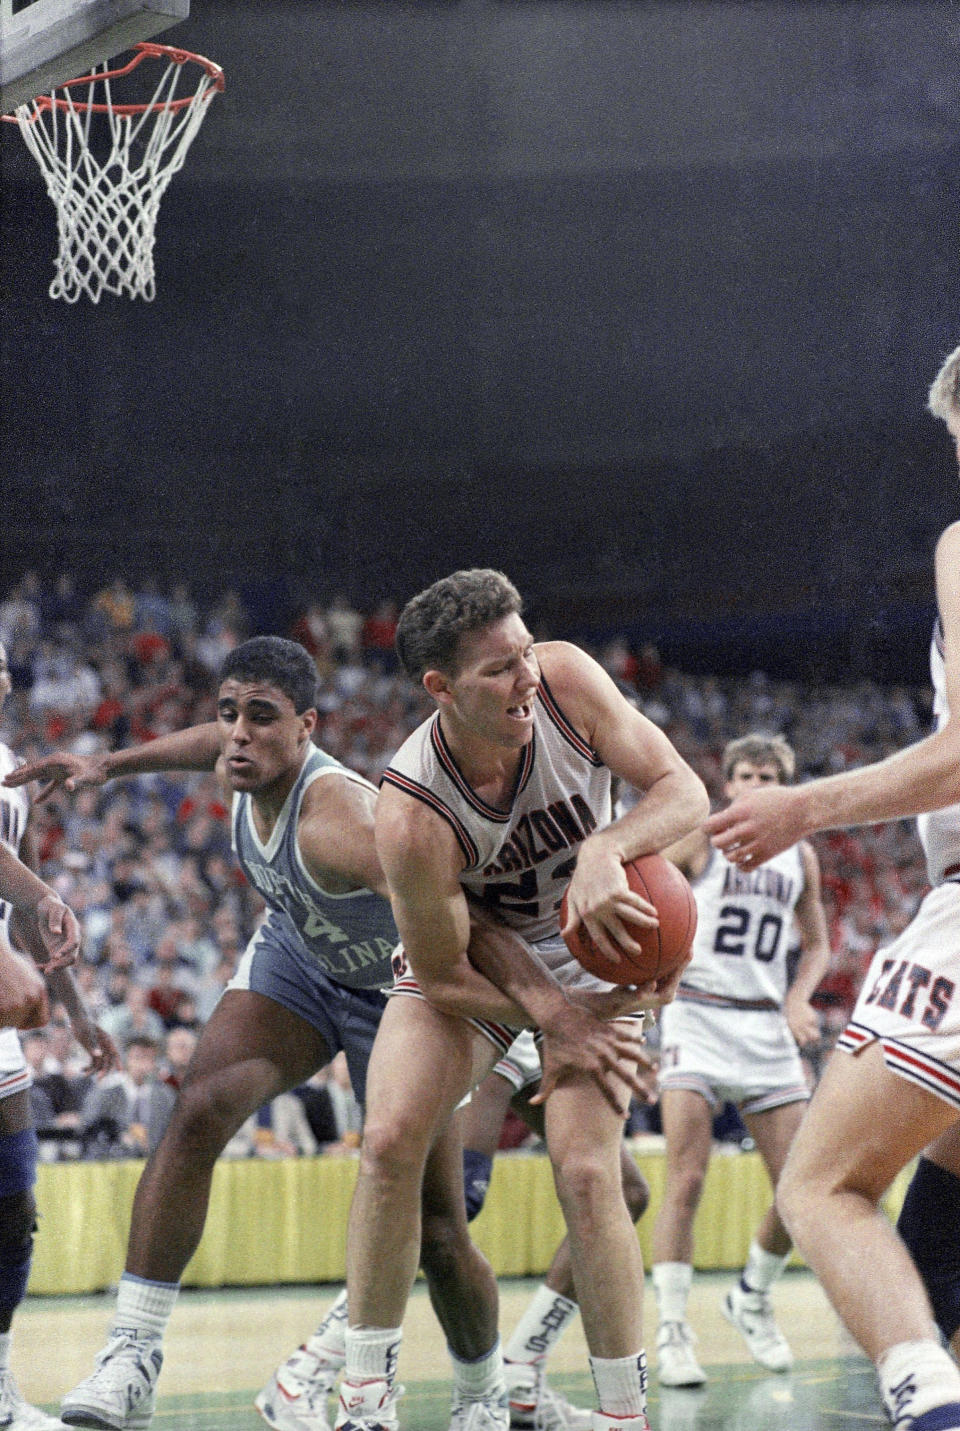 Arizona Wildcats center Tom Tolbert (right) struggles to keep control of the ball as North Carolina Tar Heels forward Rick Fox (left) takes a stab at the ball in the second half of Sunday’s NCAA West Regional Championship game in Seattle, March 27, 1988. AP Photo/Reed Saxon